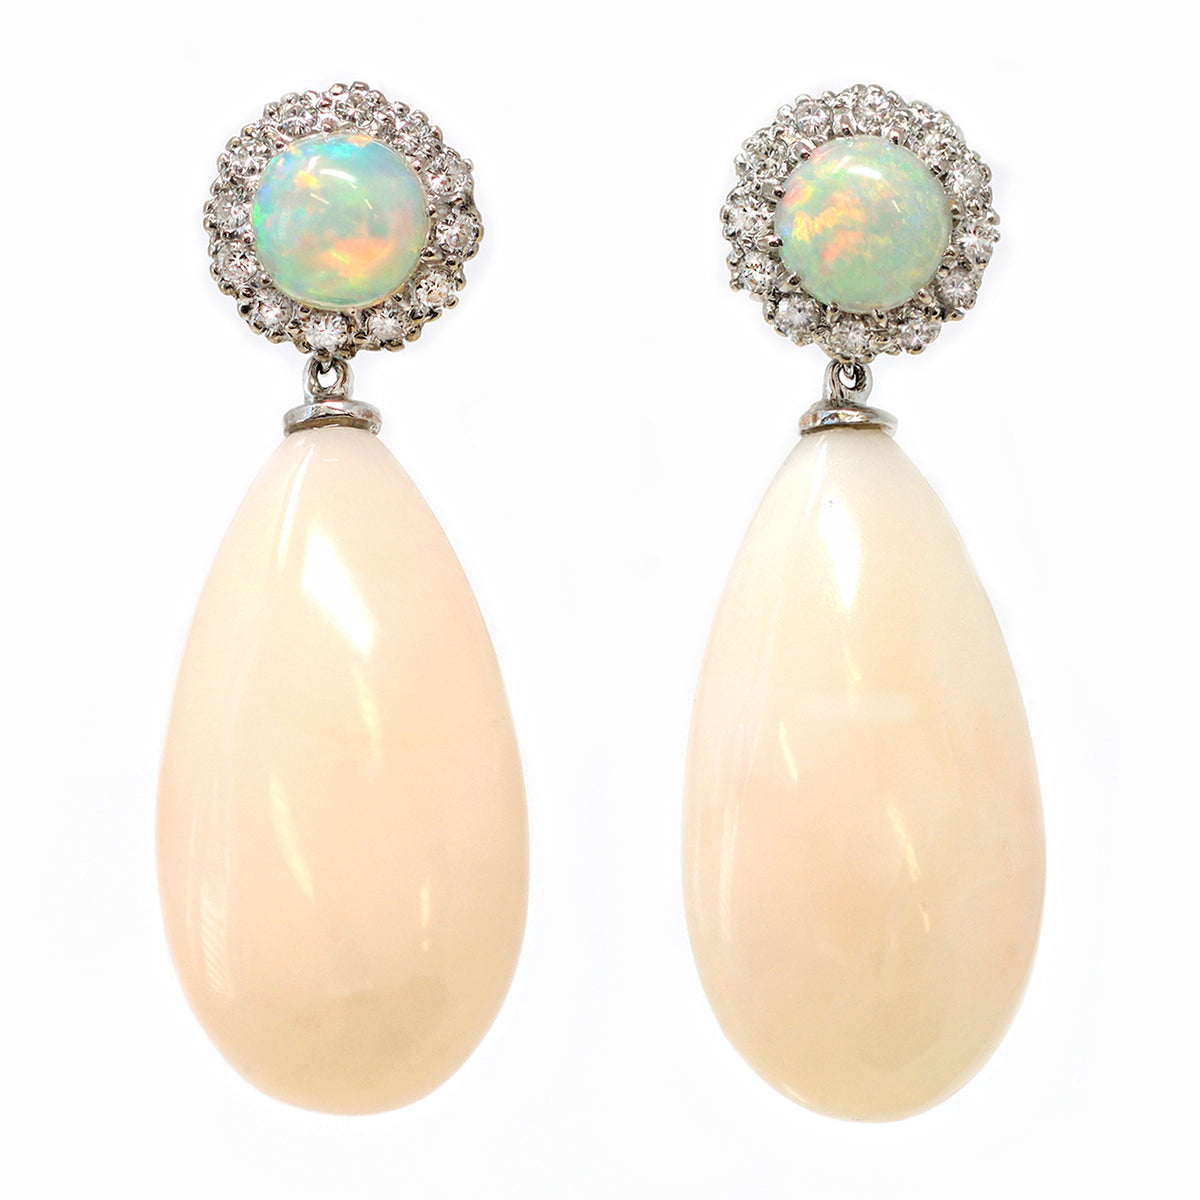  Drop Coral Pendant Earrings with Diamond Halo Opal Set in 18K front view